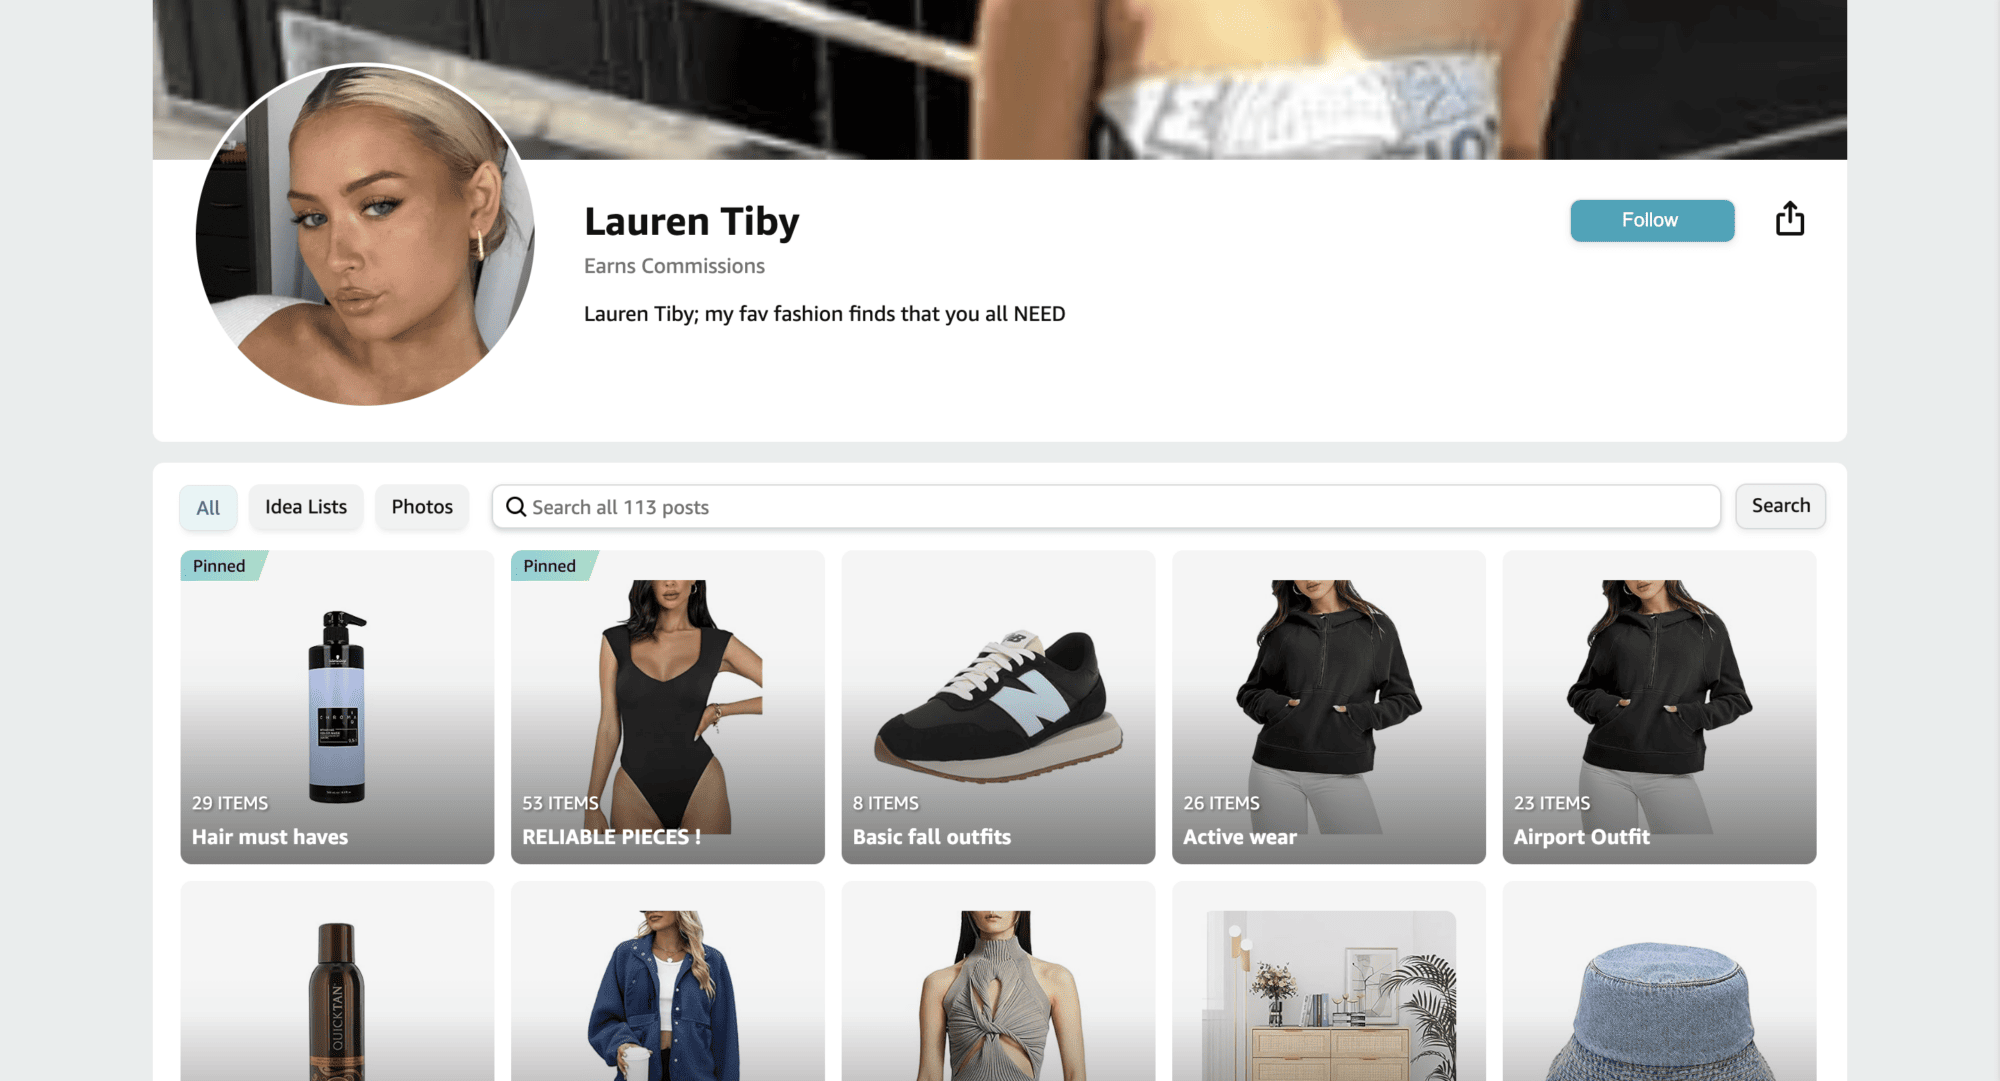 Amazon Influencer Lauren Tiby shares hair must haves, active wear, etc. on her personal storefront